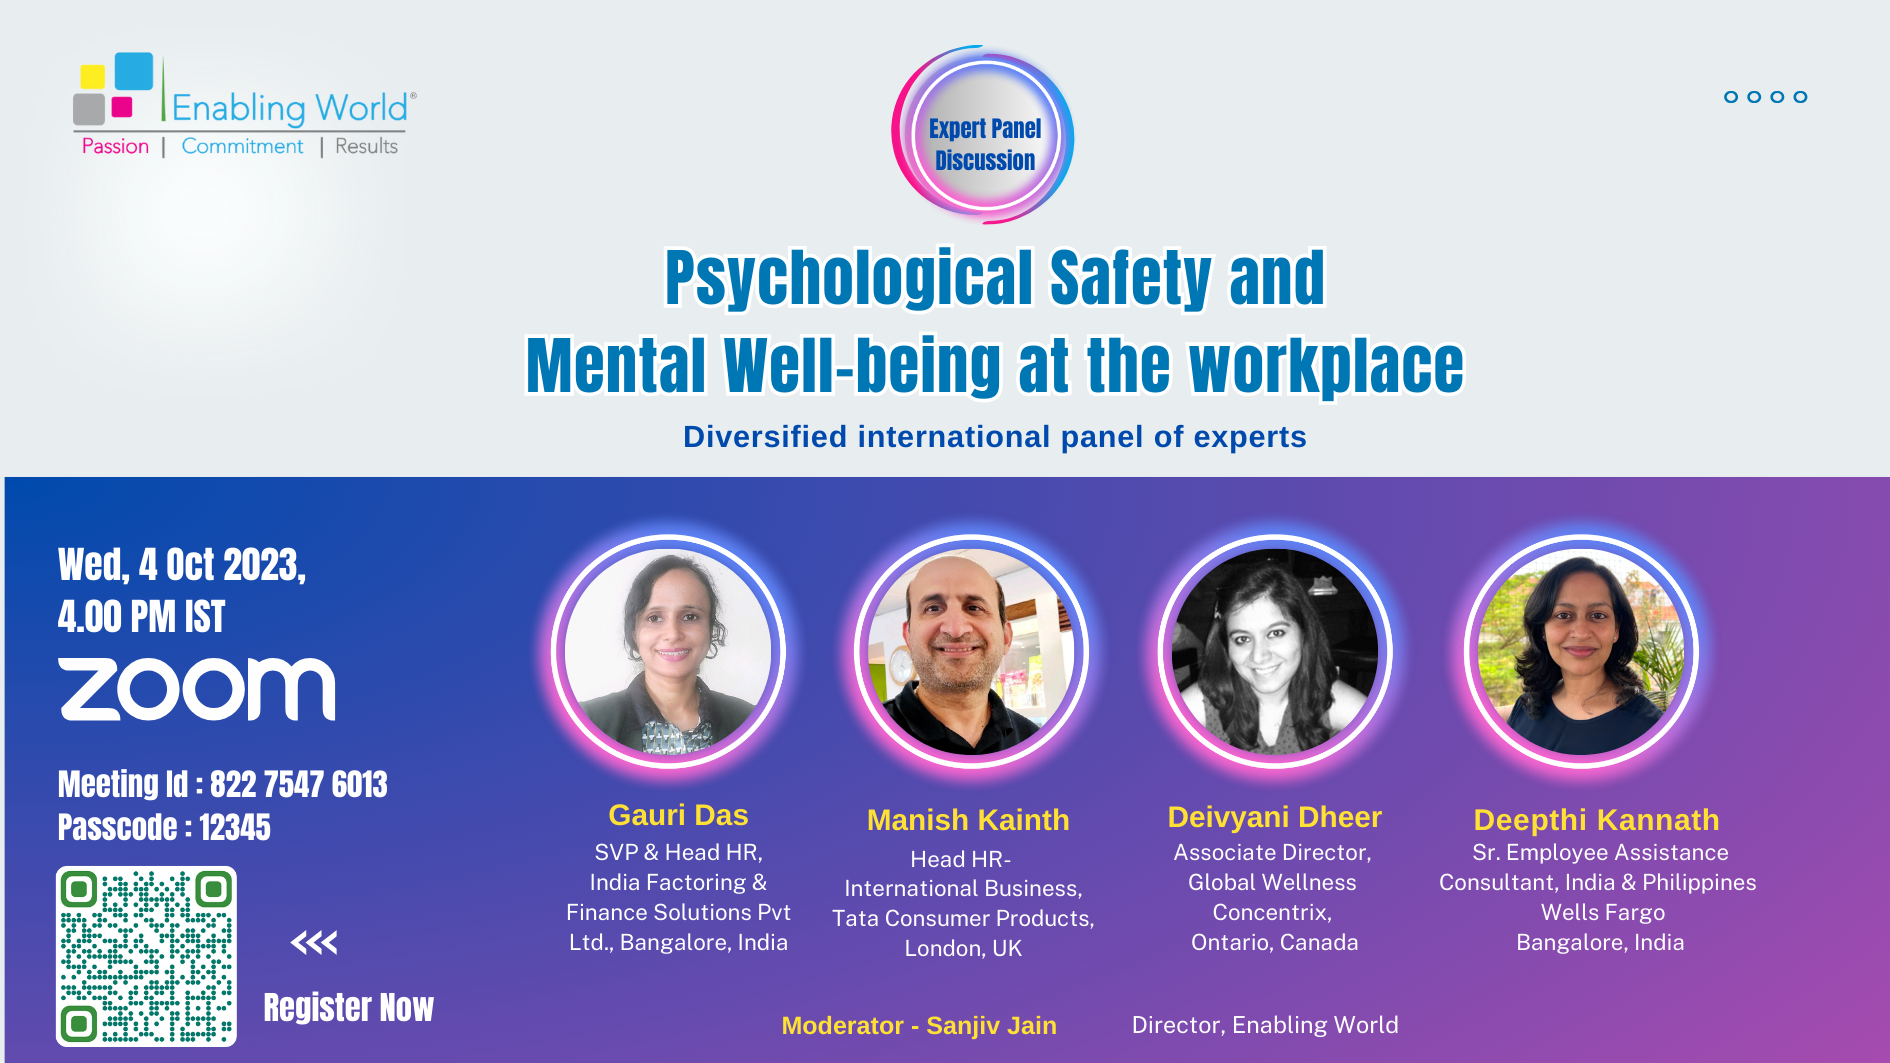 On 4th Oct 23 at 4.00 PM, Psychological Safety & Mental Well-being in the workplace- Panel Discussion